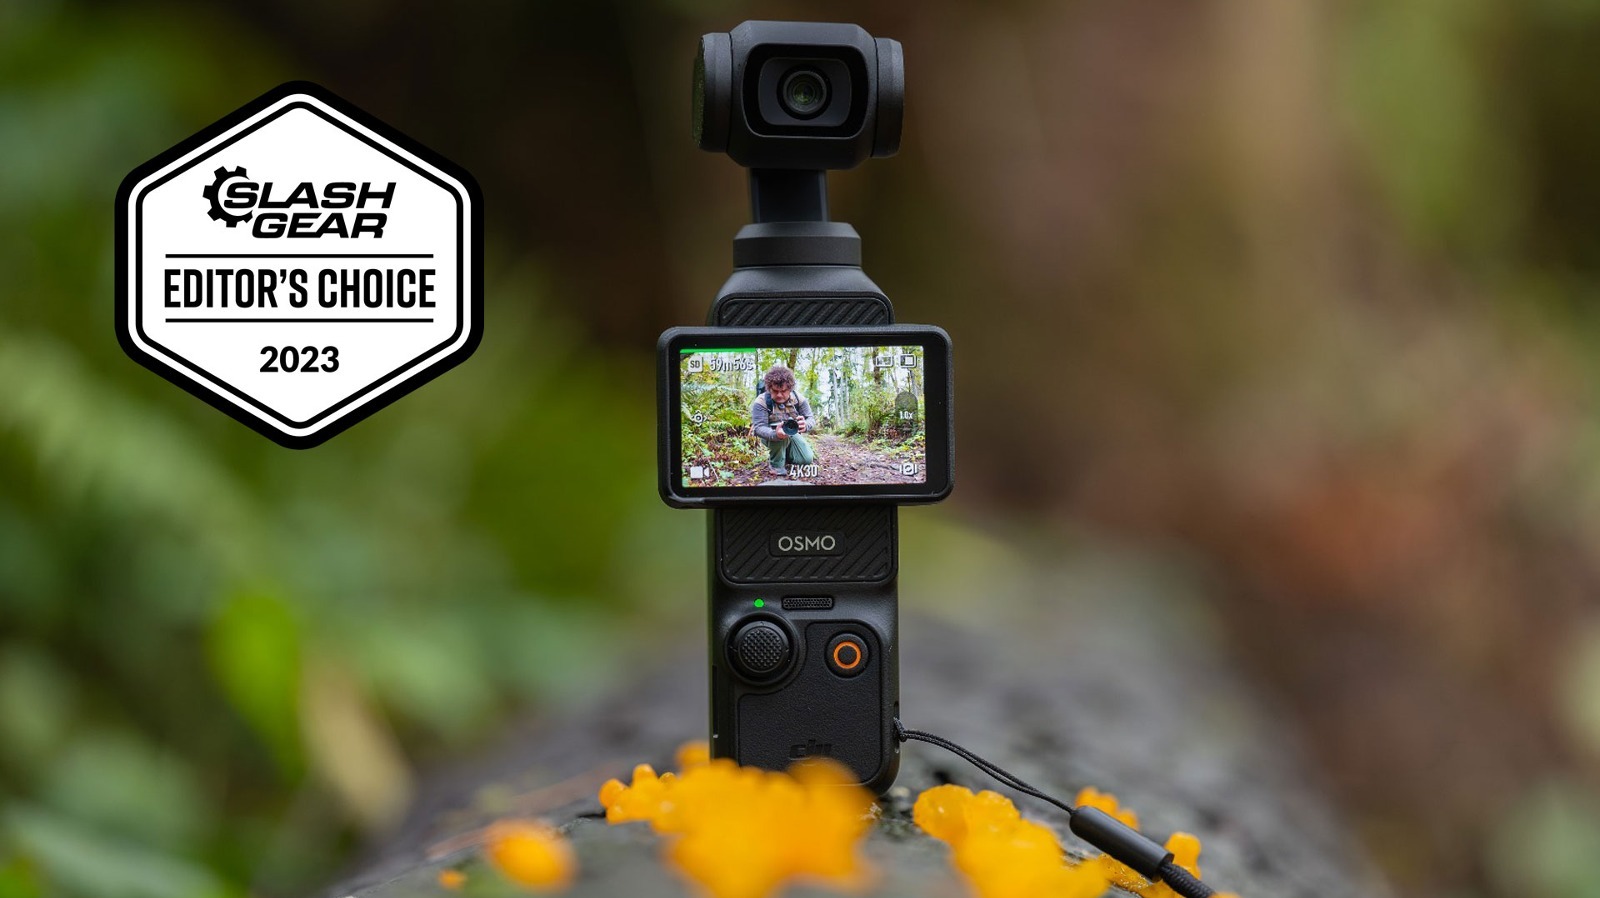 DJI Osmo Pocket 3 Review: An All-In-One Video Camera For Solo DIY Filmmakers